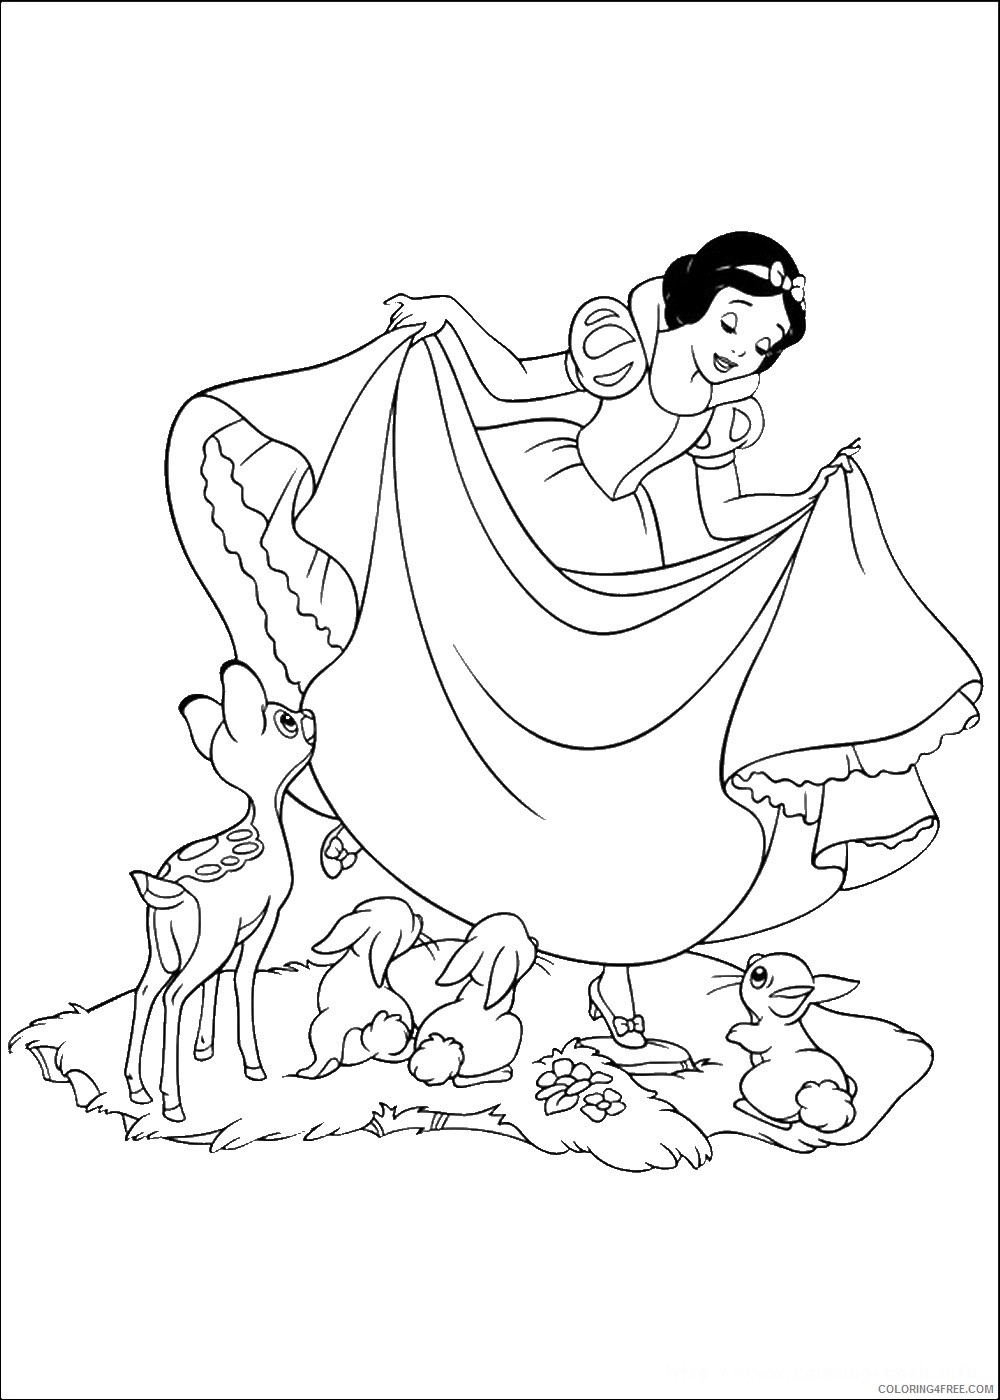 Snow White Coloring Pages Cartoons snow_white_cl_33 Printable 2020 5729 Coloring4free